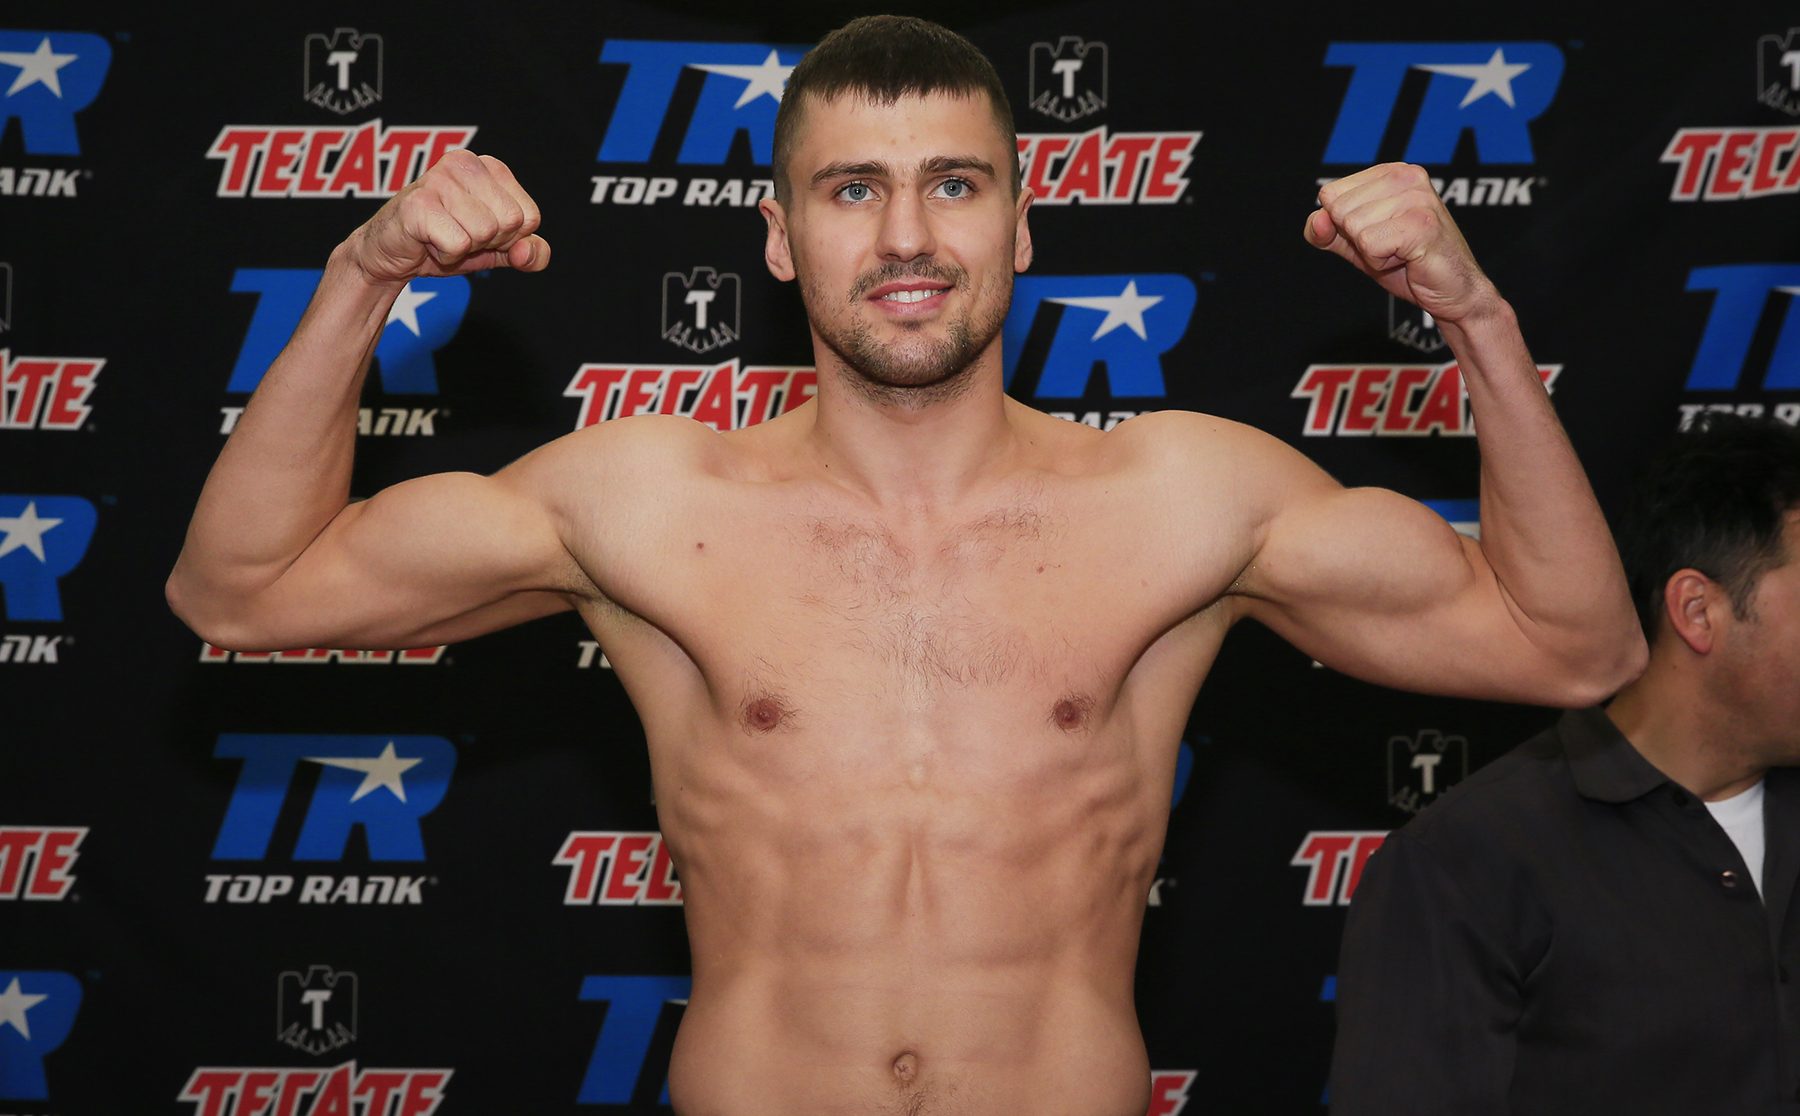 Gvozdyk oleksandr stevenson adonis fight wbc title heavyweight light his stoppage 11th round february finds move way after belt showtime